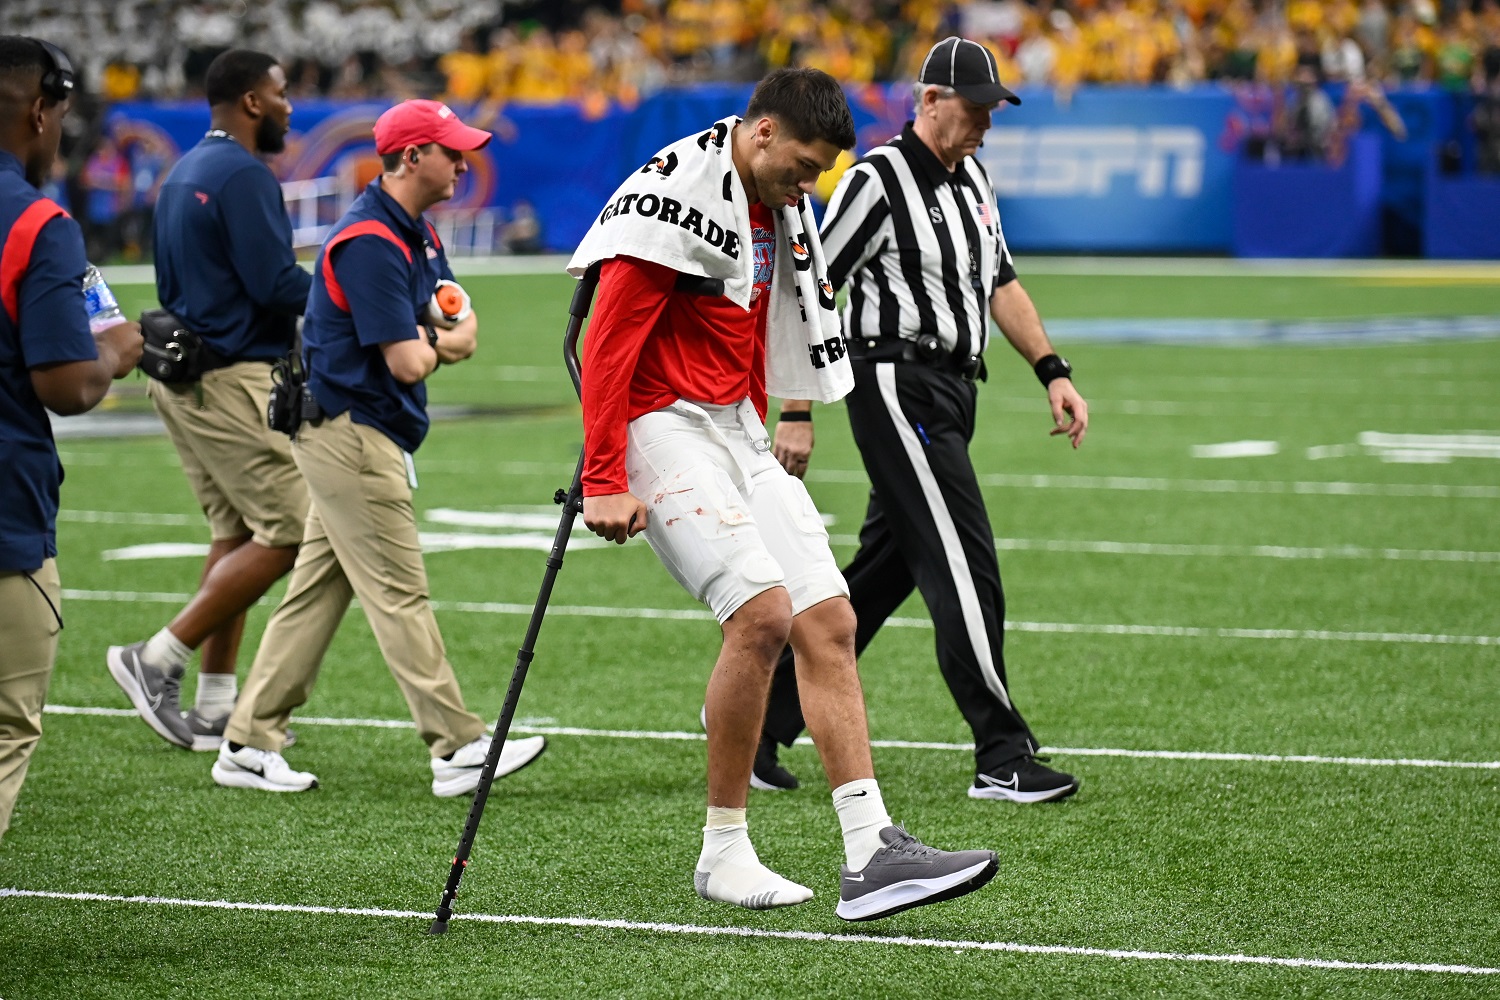 Ole Miss quarterback Matt Corral on crutches after being injured in the first half of the college football game against Baylor on Jan. 1, 2022.